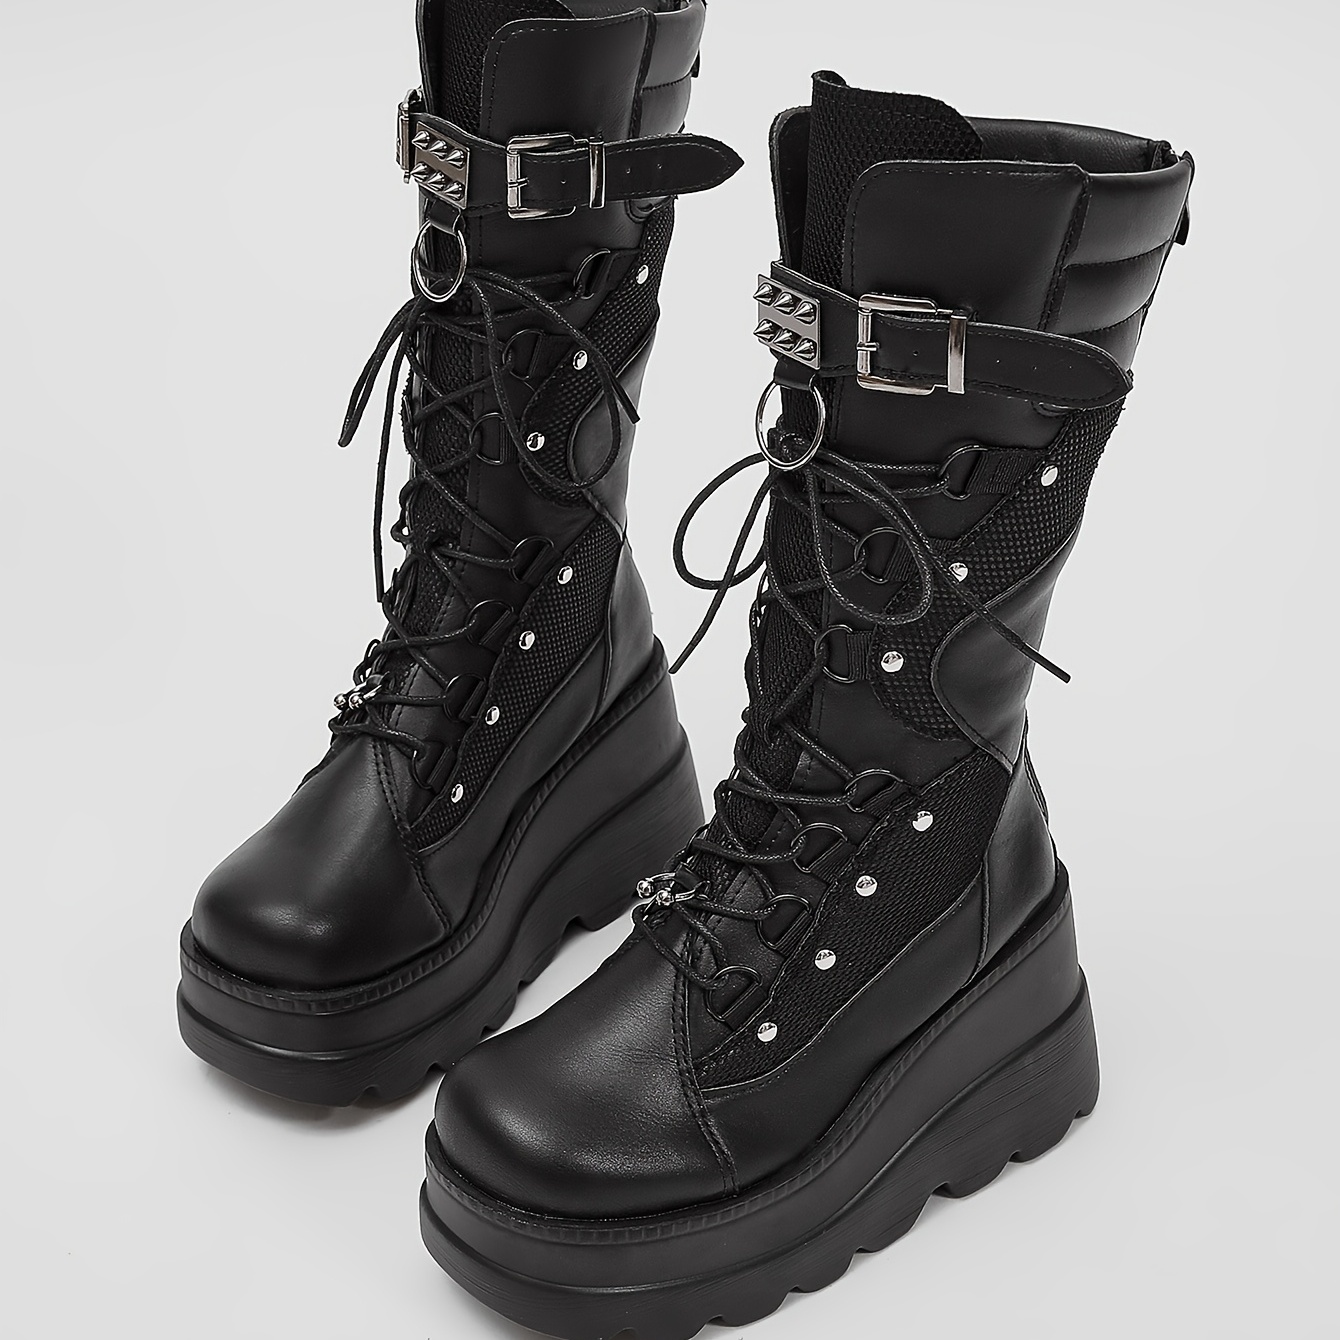 Women's Mid-Calf Boots with Rounded Toes and Decorative Laces - Dark Gray